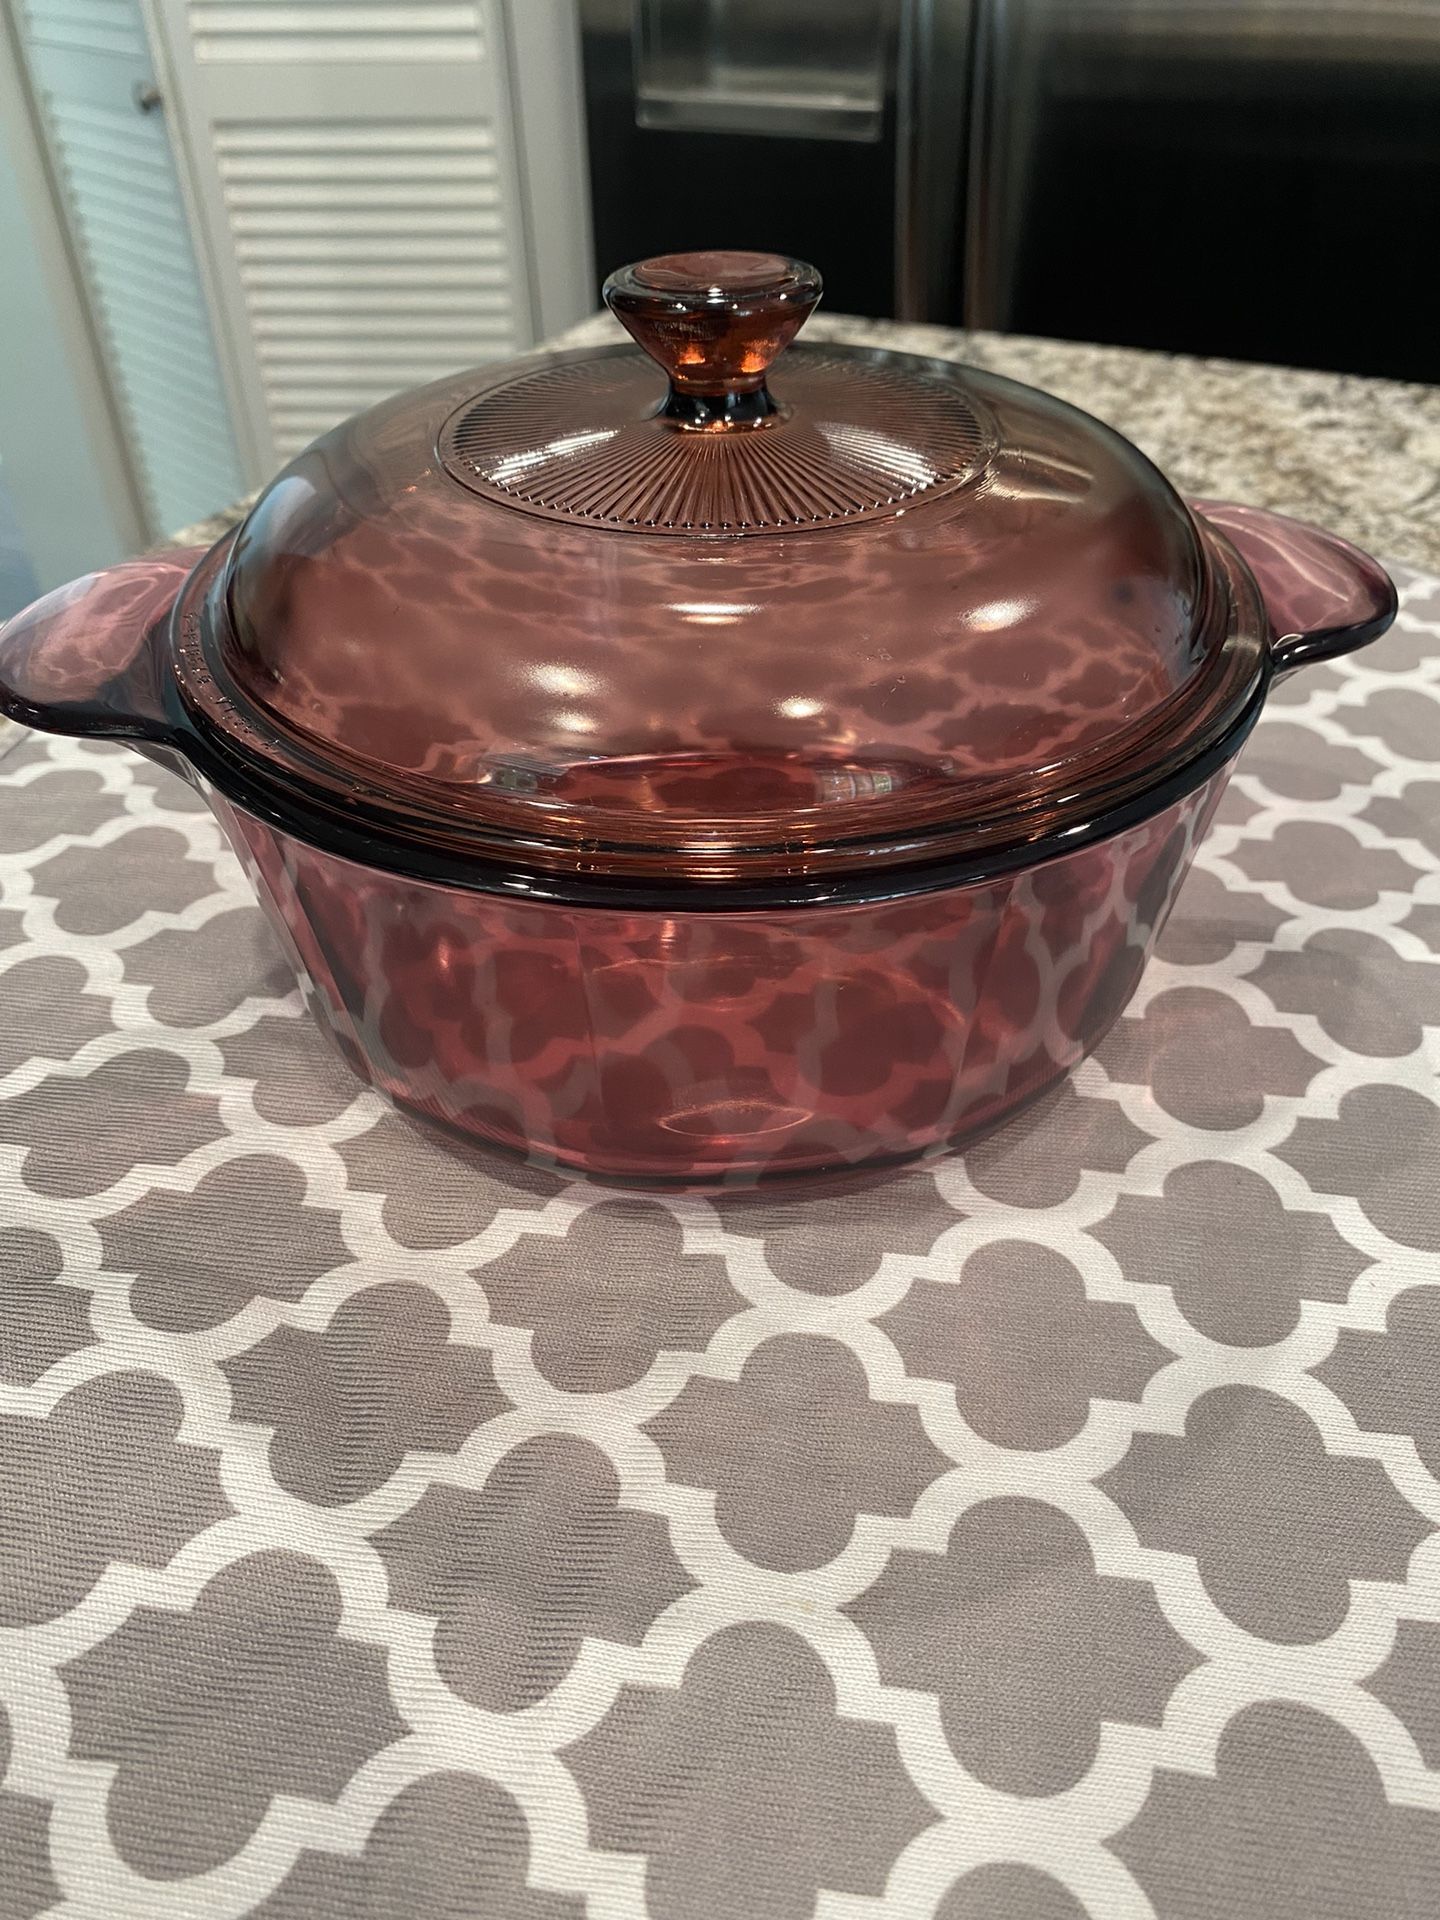 CORNING PYREX VISION CRANBERRY 1.5 QT COVERED CASSEROLE DISH